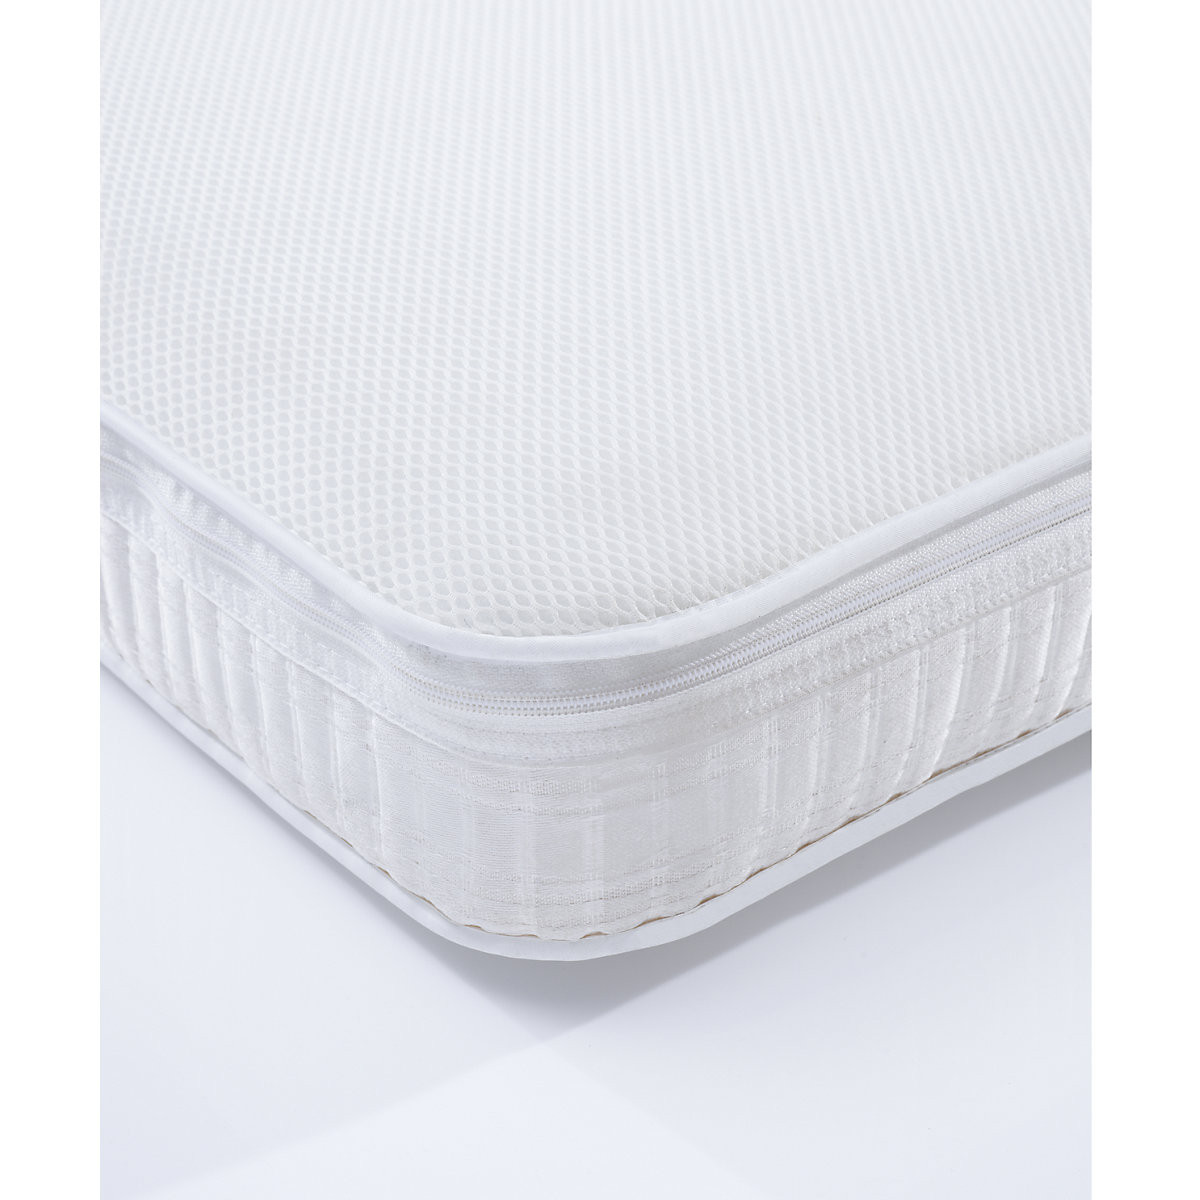 cotbed mattress mothercare